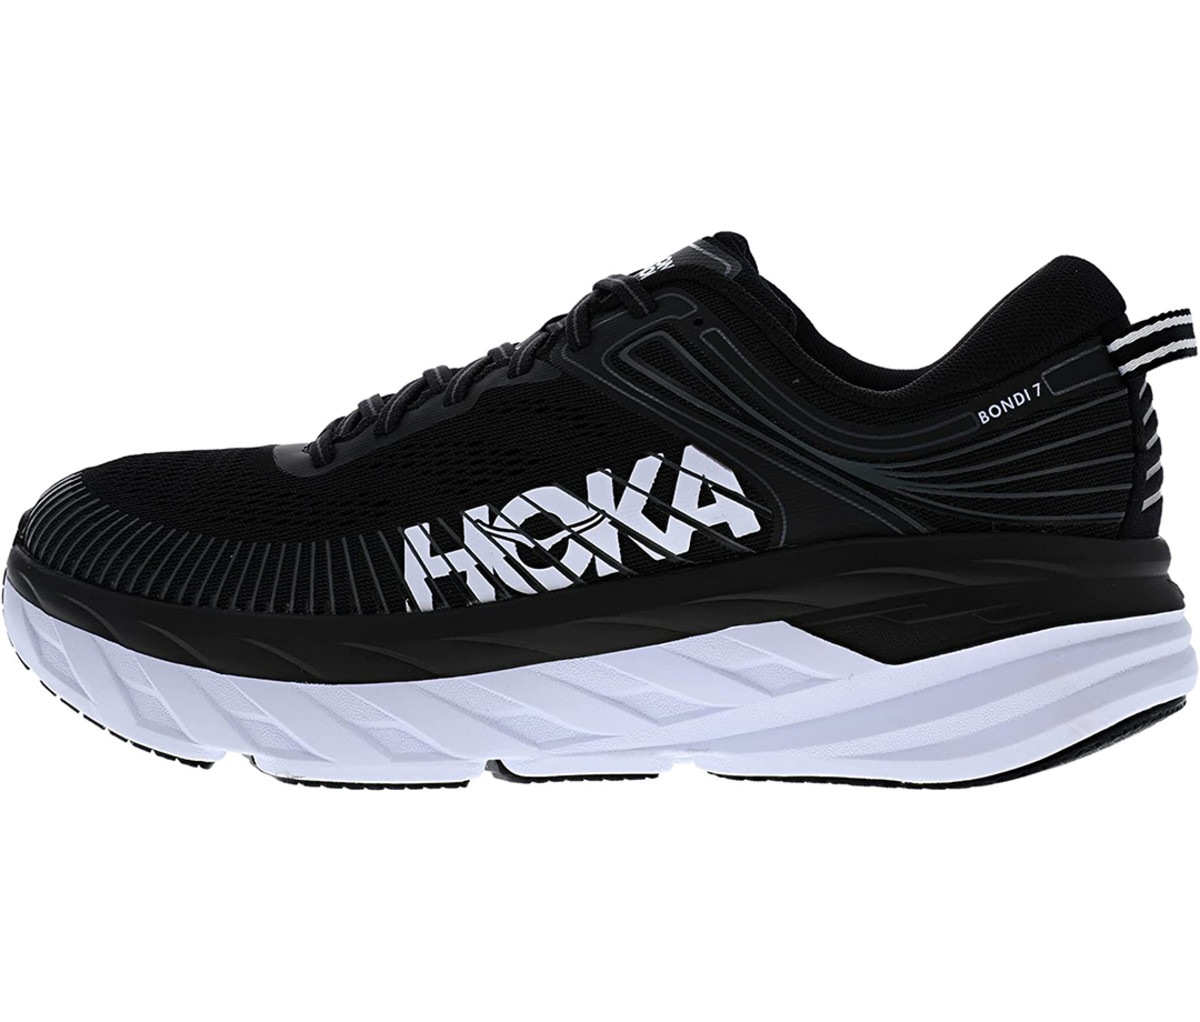 Upgrade Those Runners of Yours With These Hoka Bondi Running Shoes ...